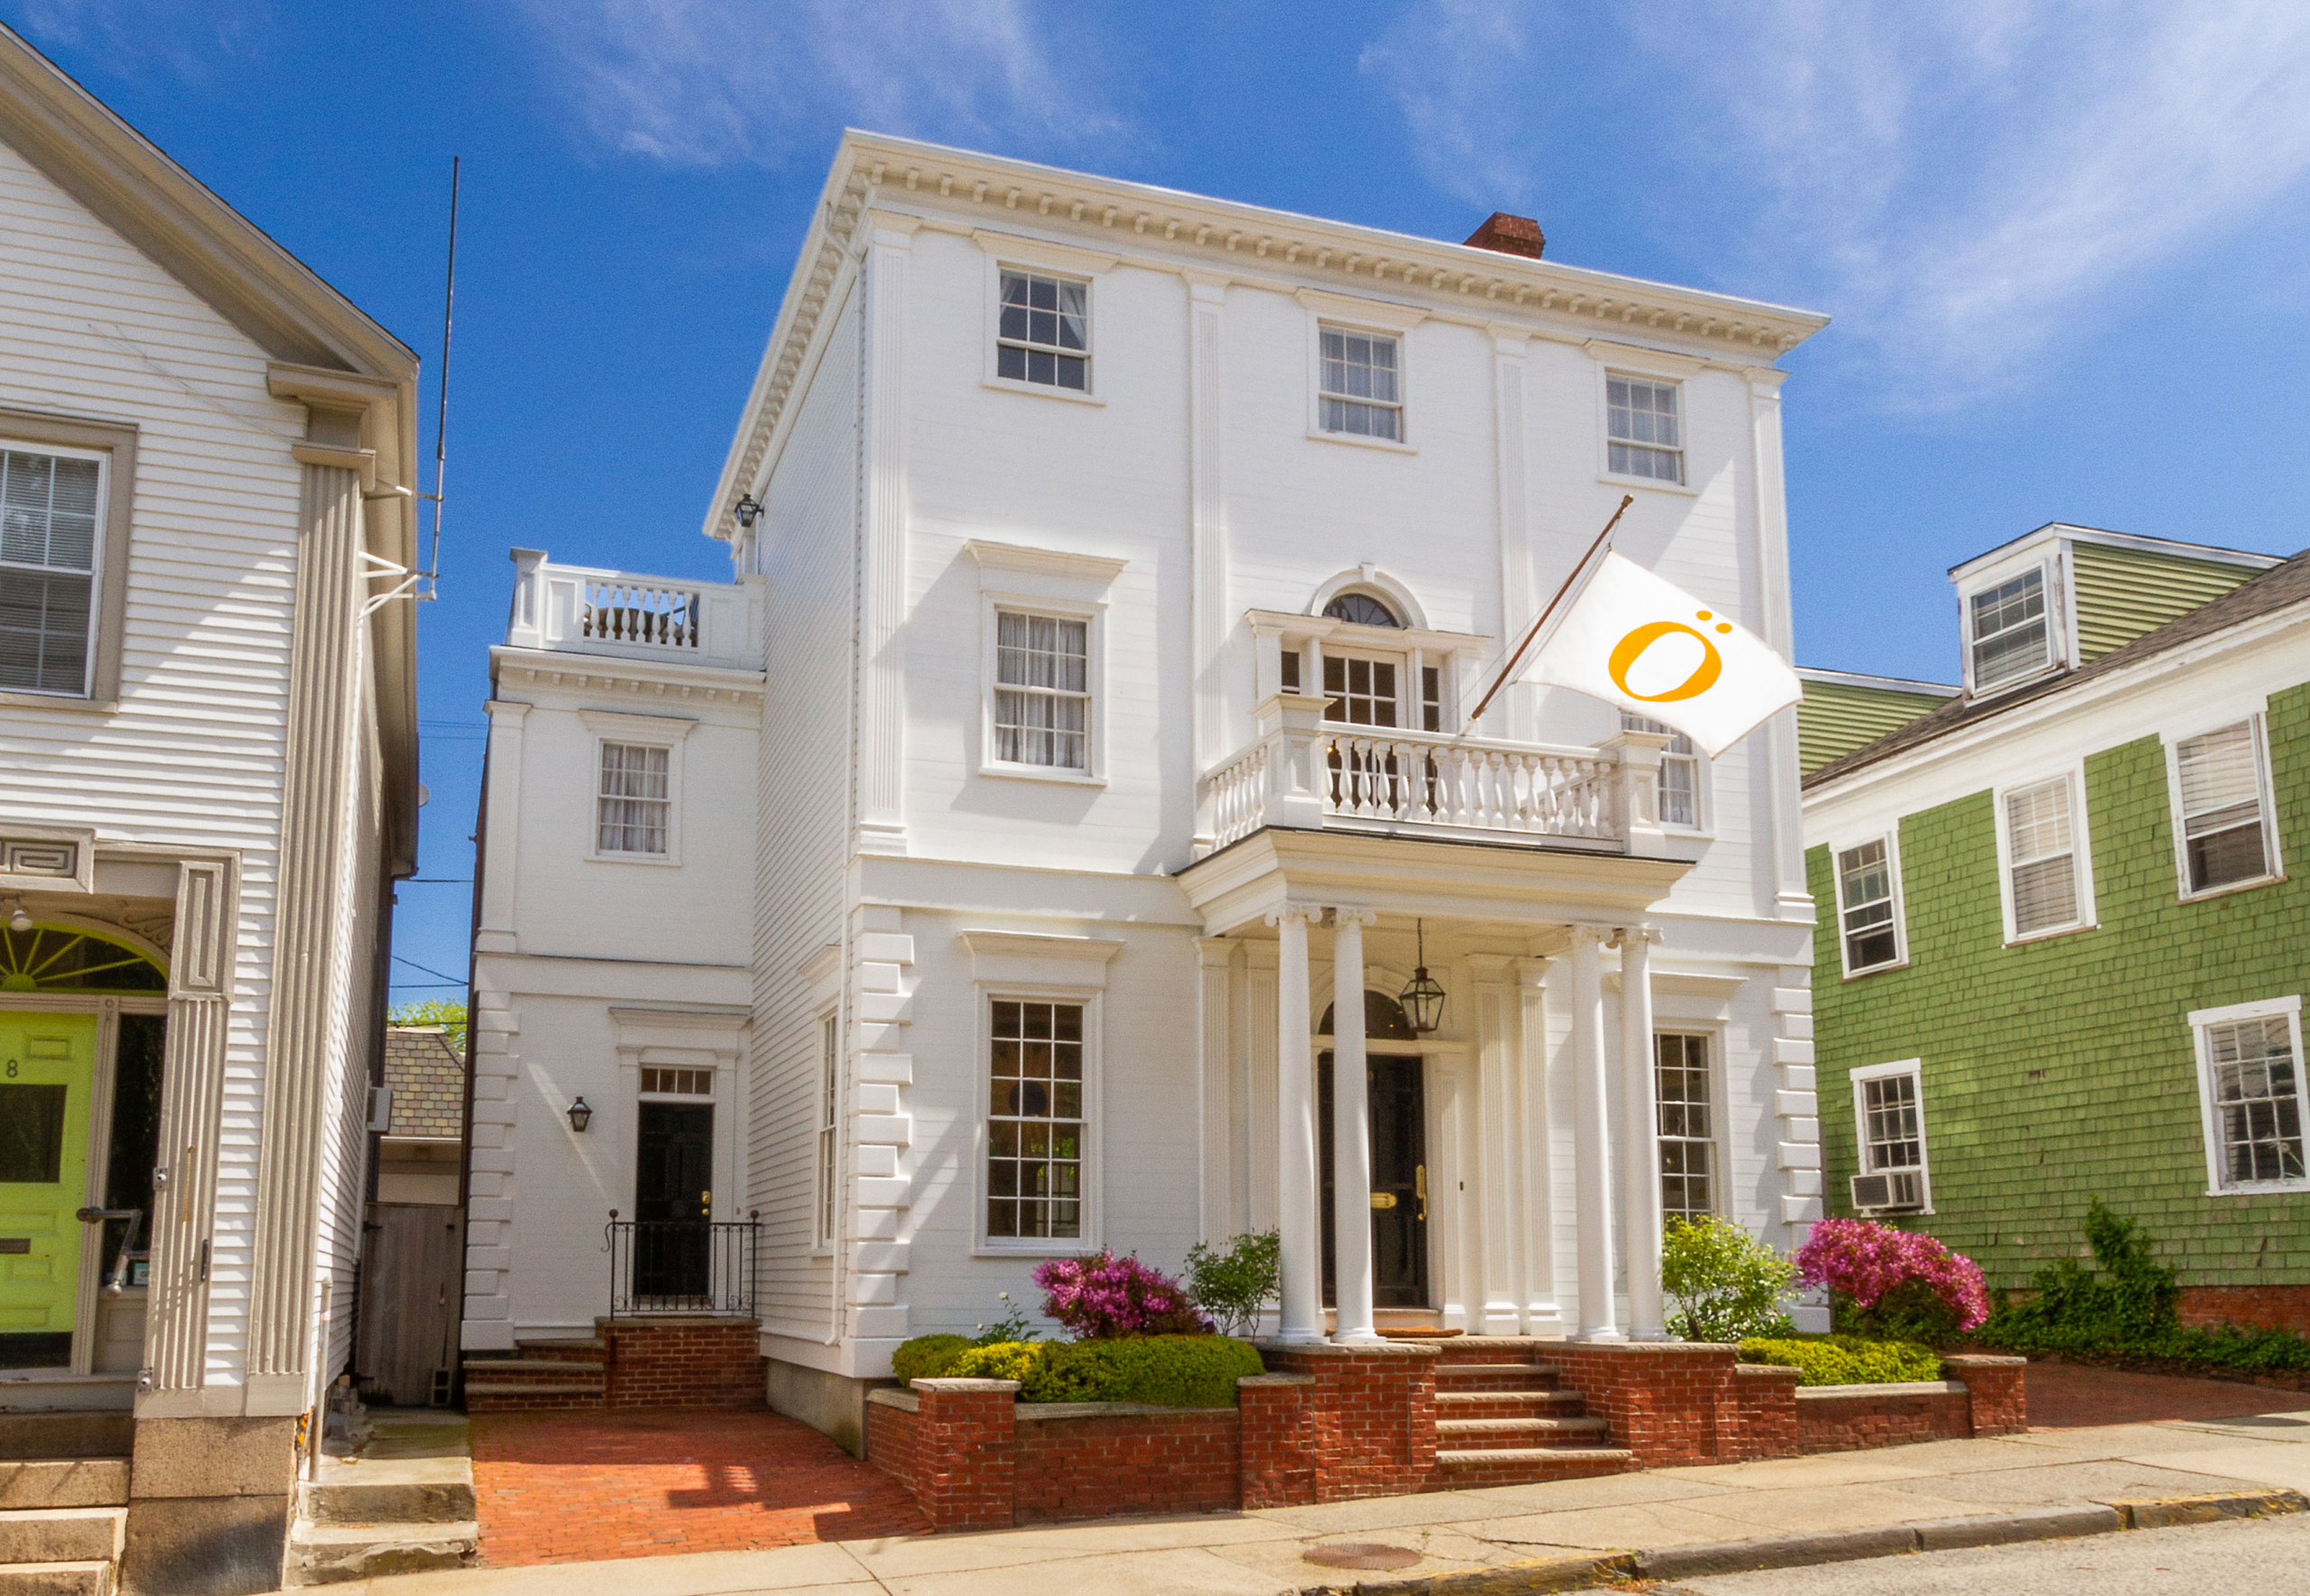 KENDRA TOPPA OF LILA DELMAN SELLS GEORGIAN-STYLE TOWNHOUSE ON NEWPORT’S HISTORIC HILL FOR $1,820,000